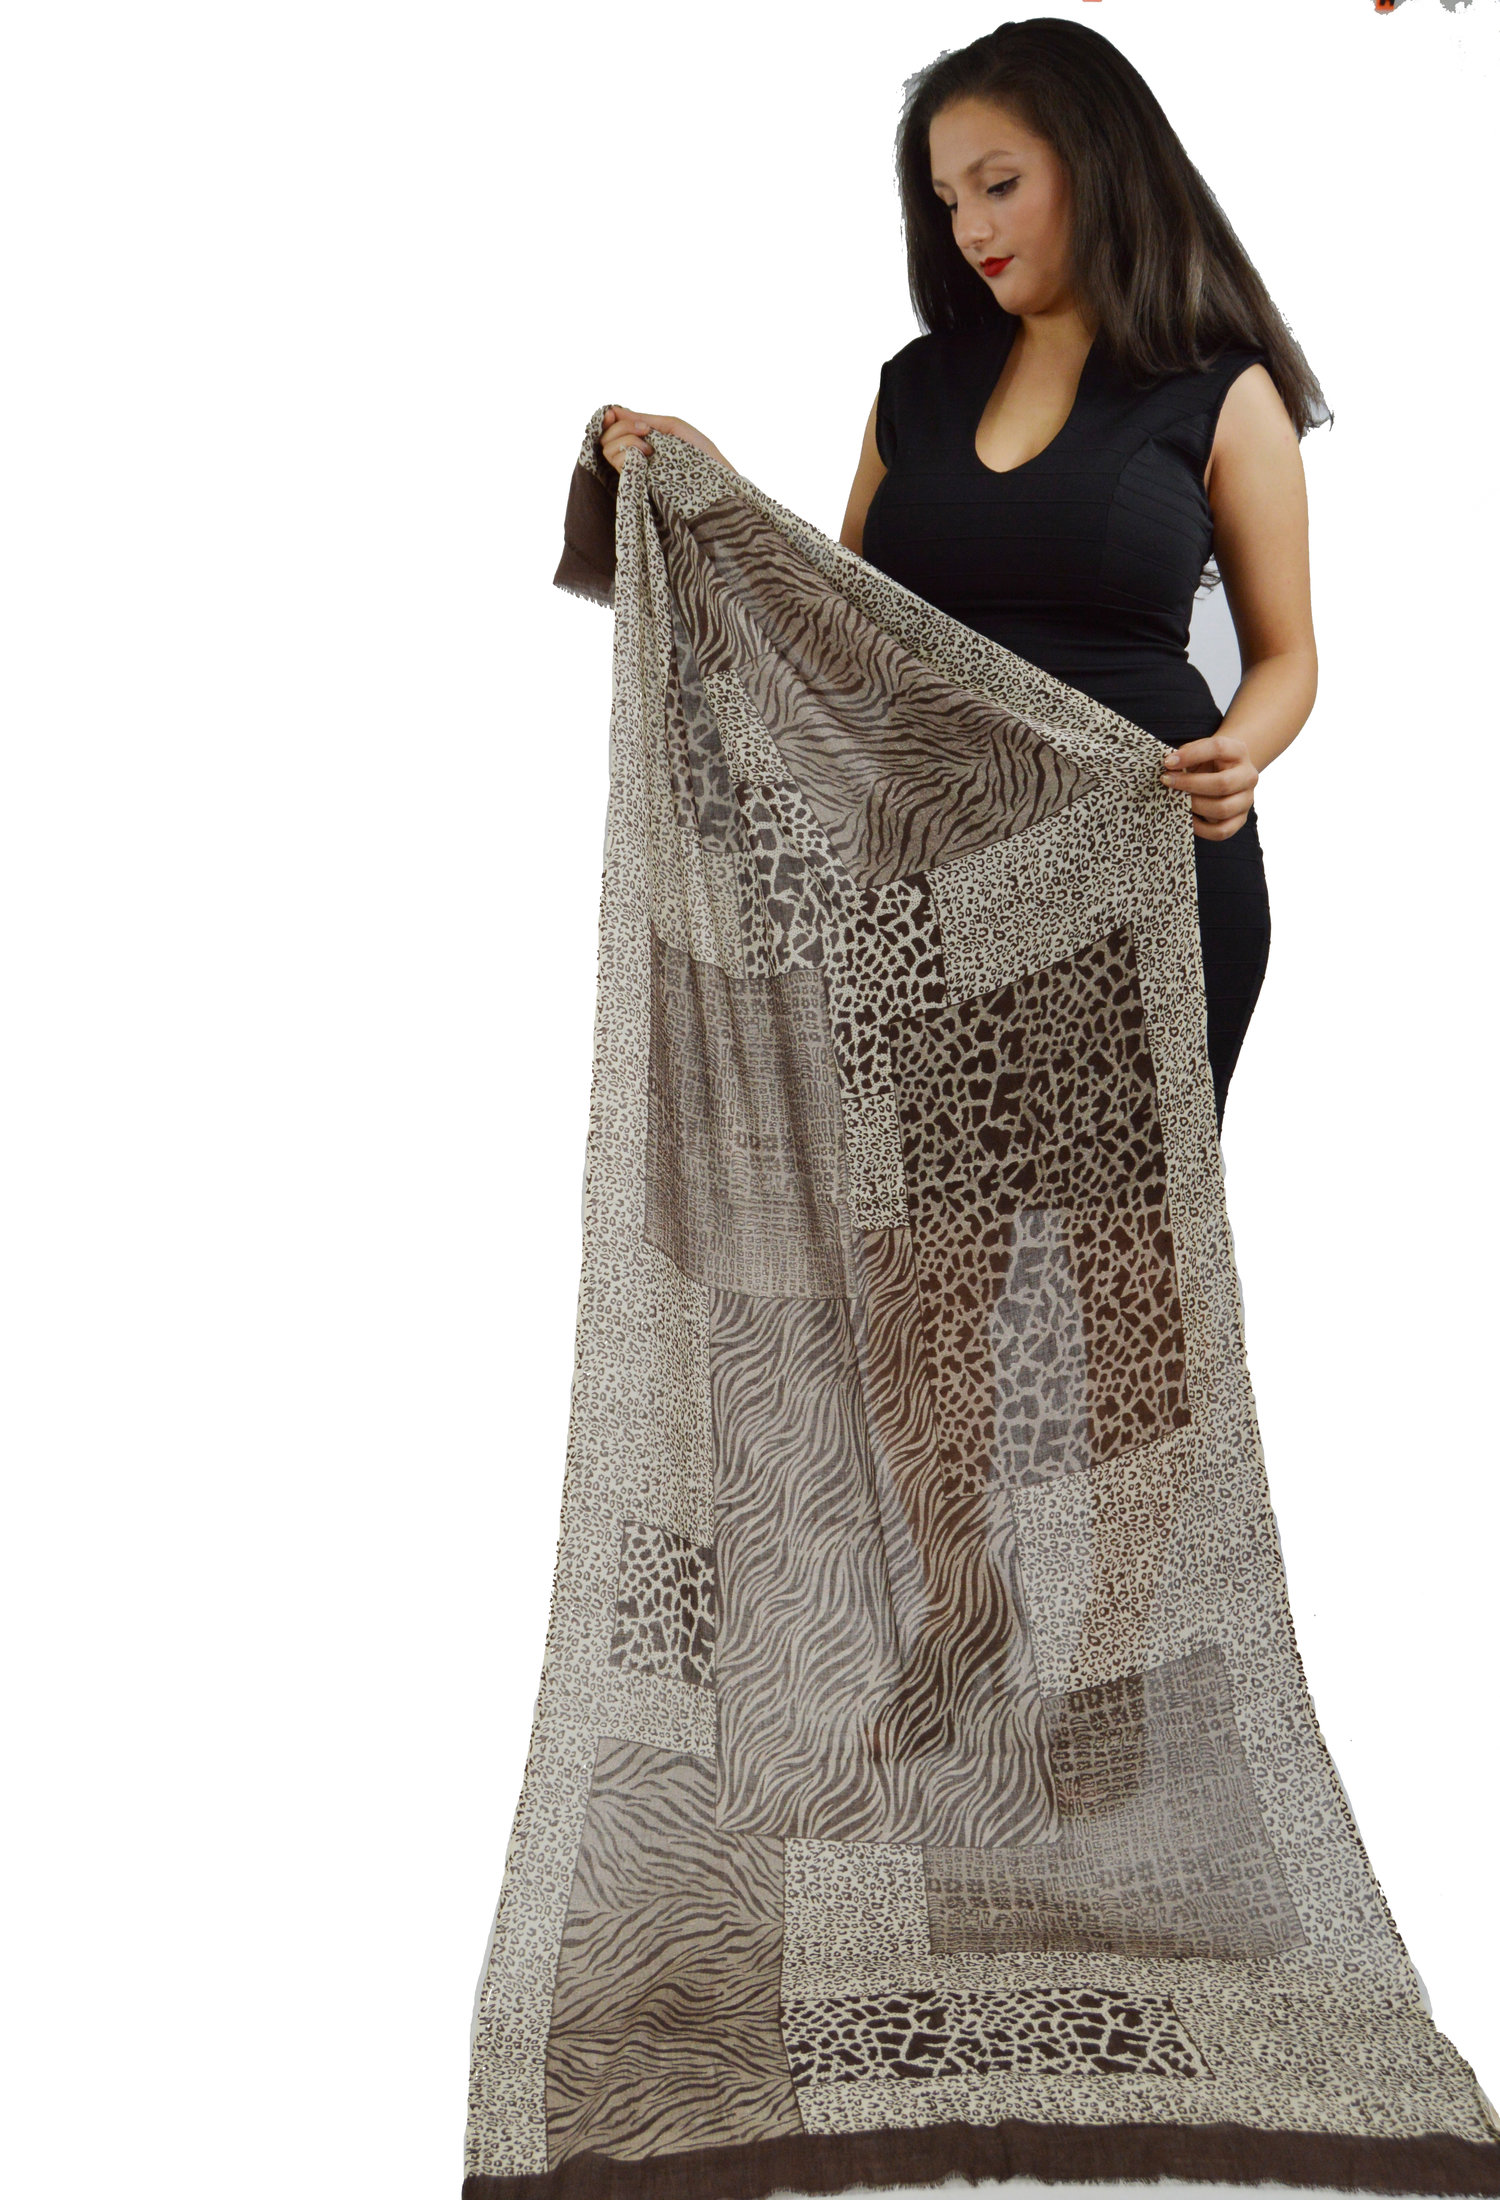 Cashmere Scarf/ Shawl/ Wraps/ in Animal Print (Hand Block Printing) Cow, Leopard and Brown Zebra — Pashmina Group